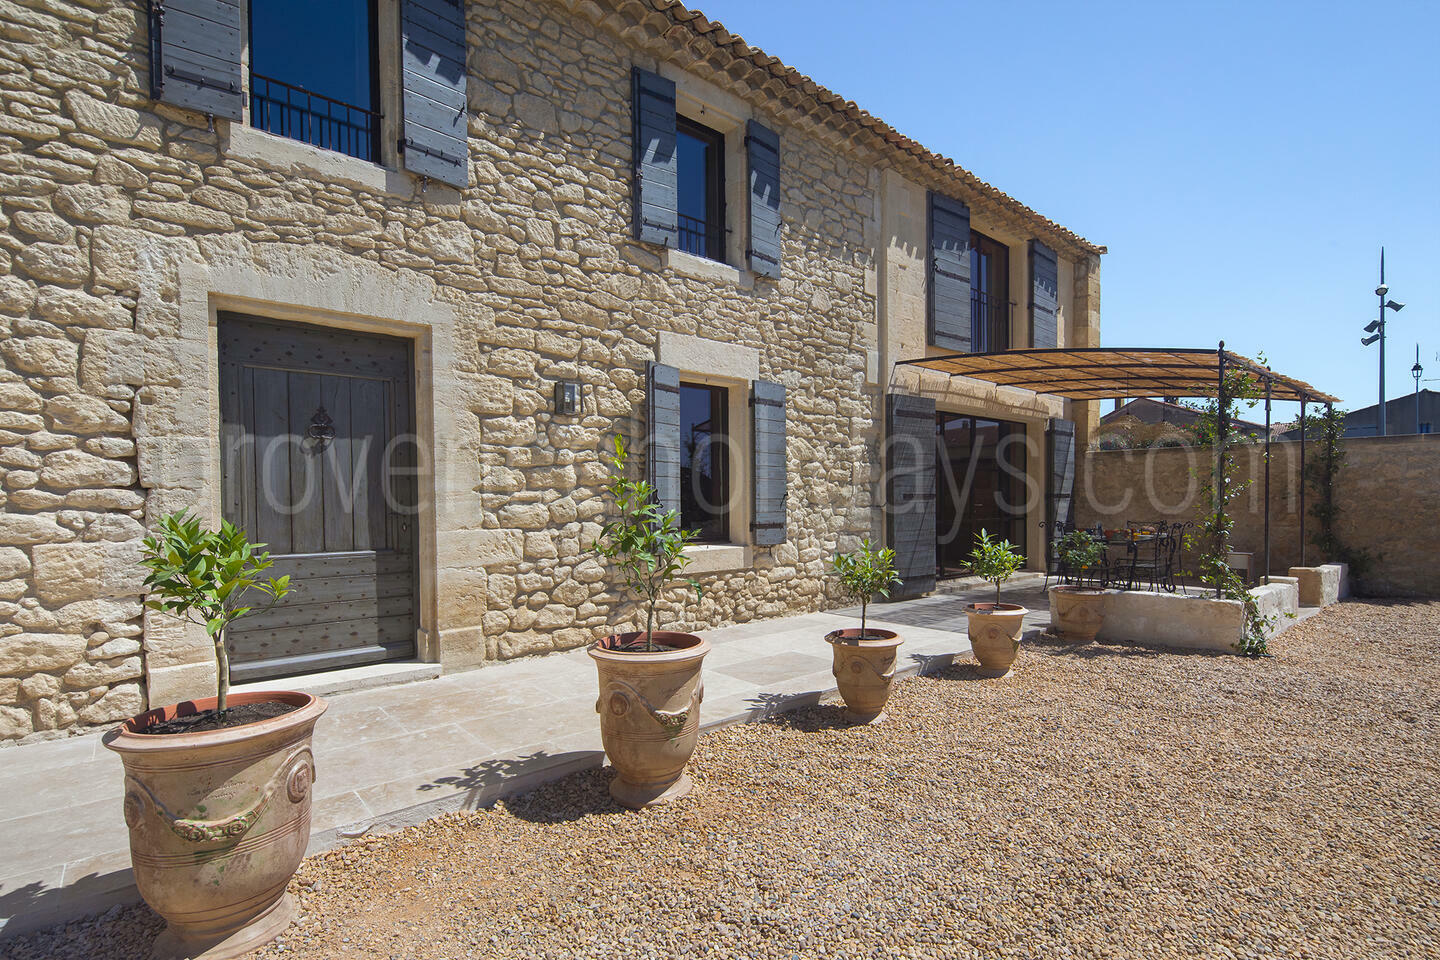 Luxury Holiday Rental with Heated Pool near Avignon Mas des Lions - 1